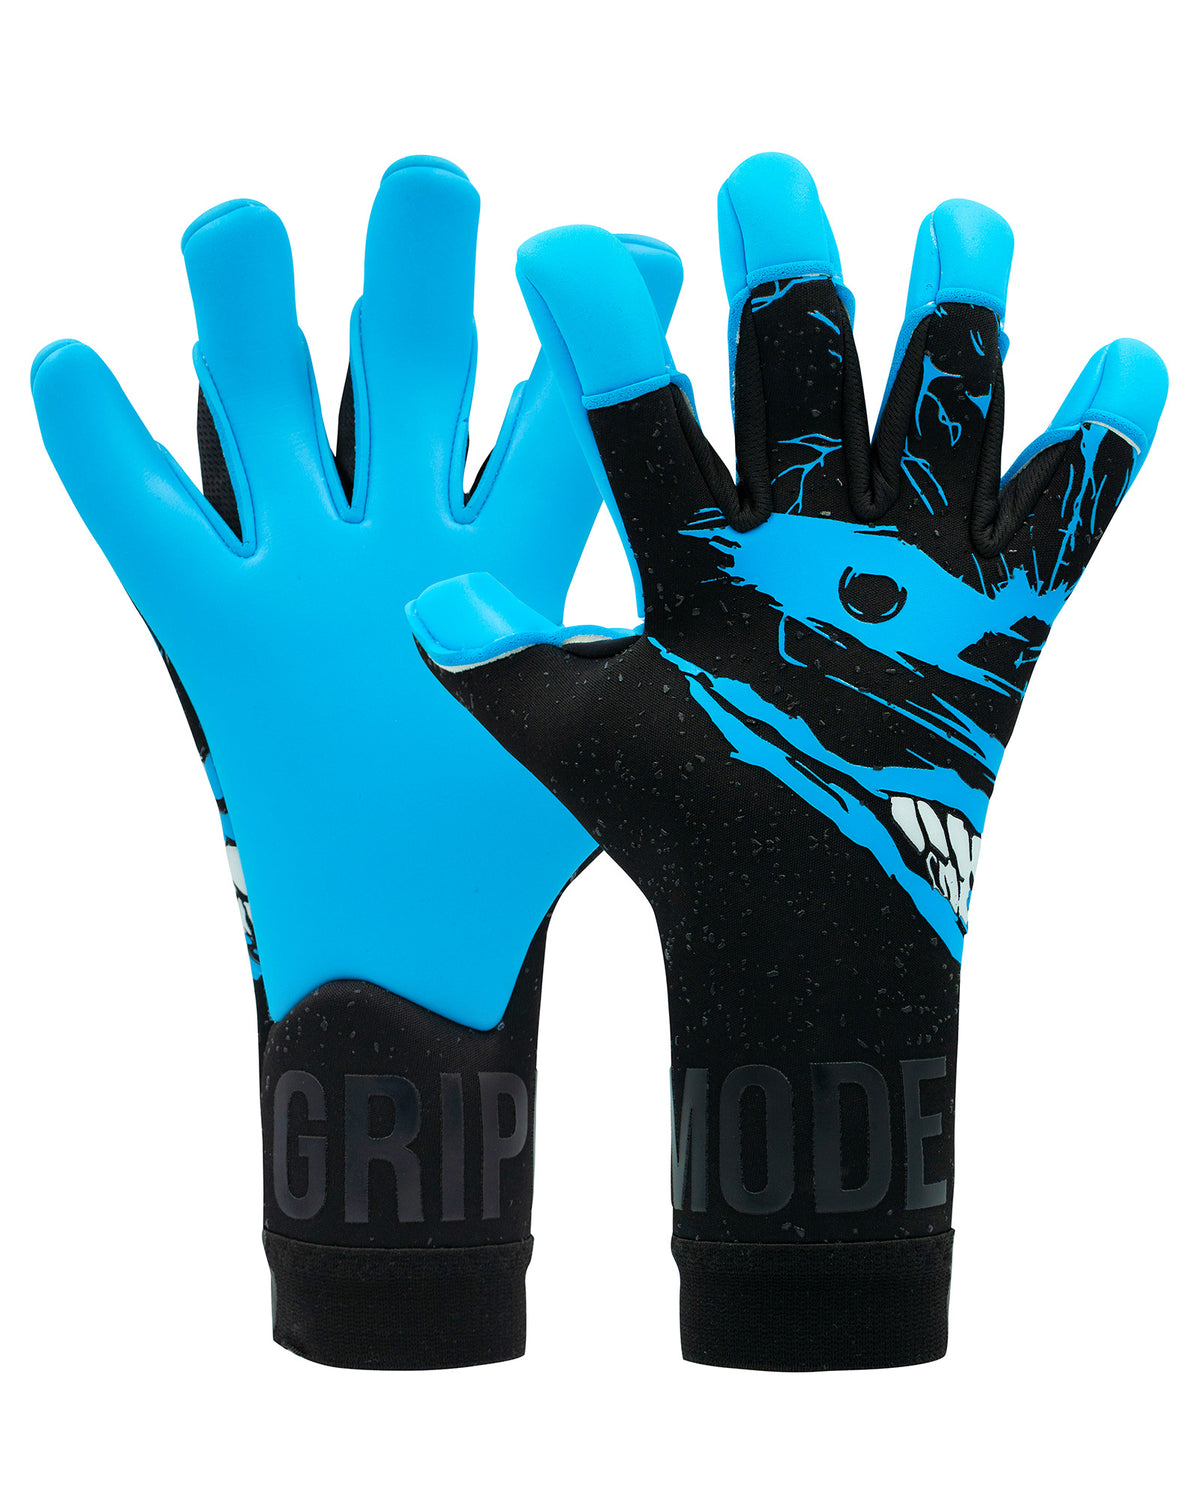 Gripmode Halloween Edition Goalkeeper gloves with hybrid cut  for soccer and football